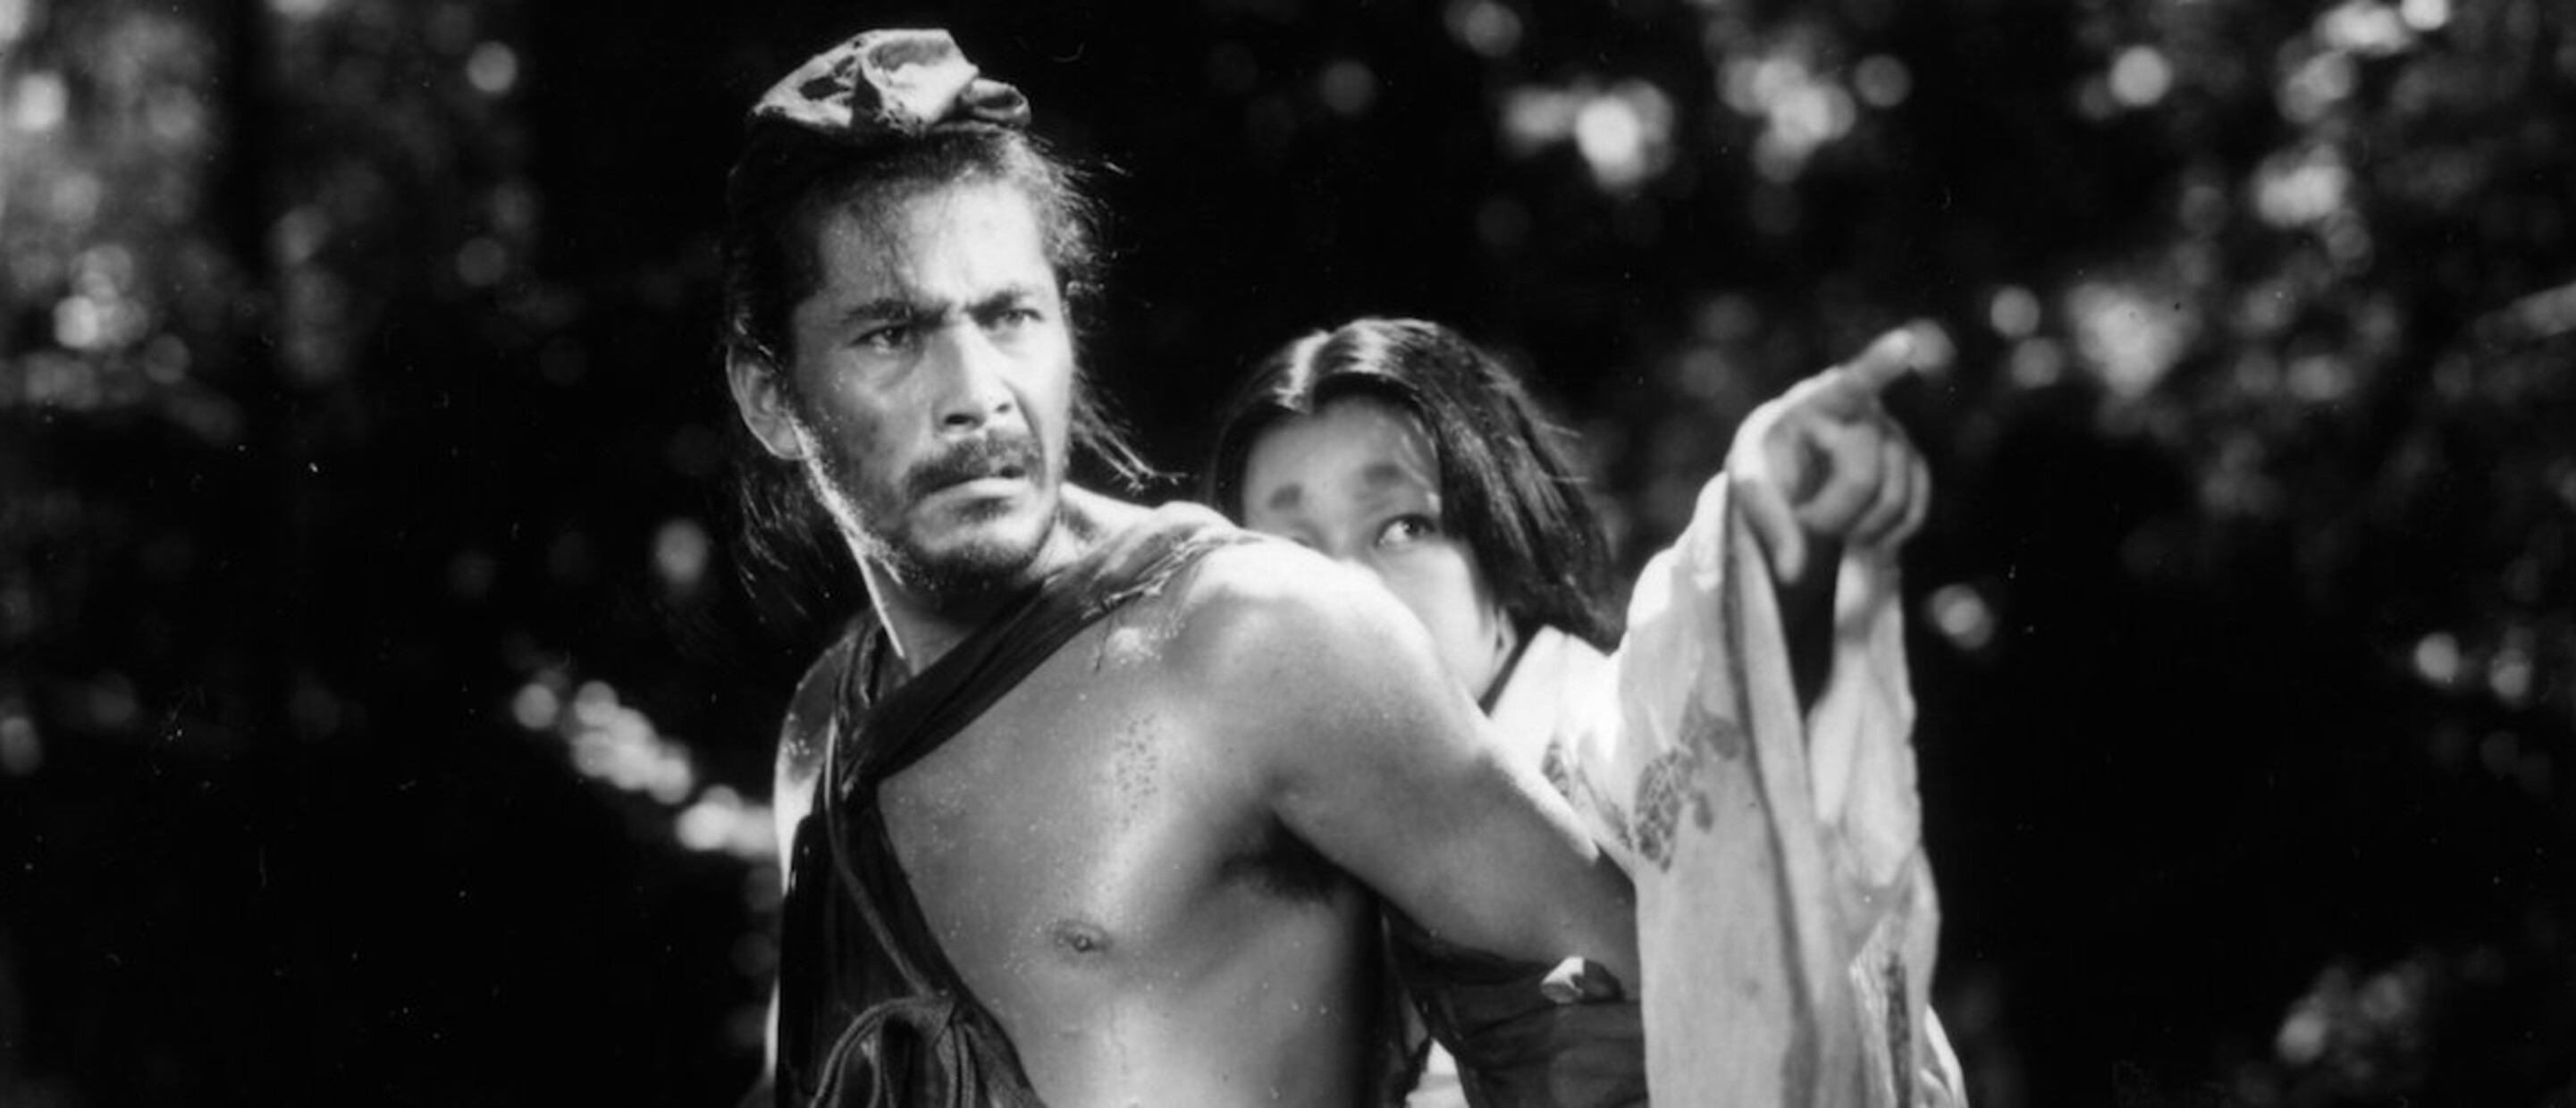 film still from Rashomon film with the thief and wife characters